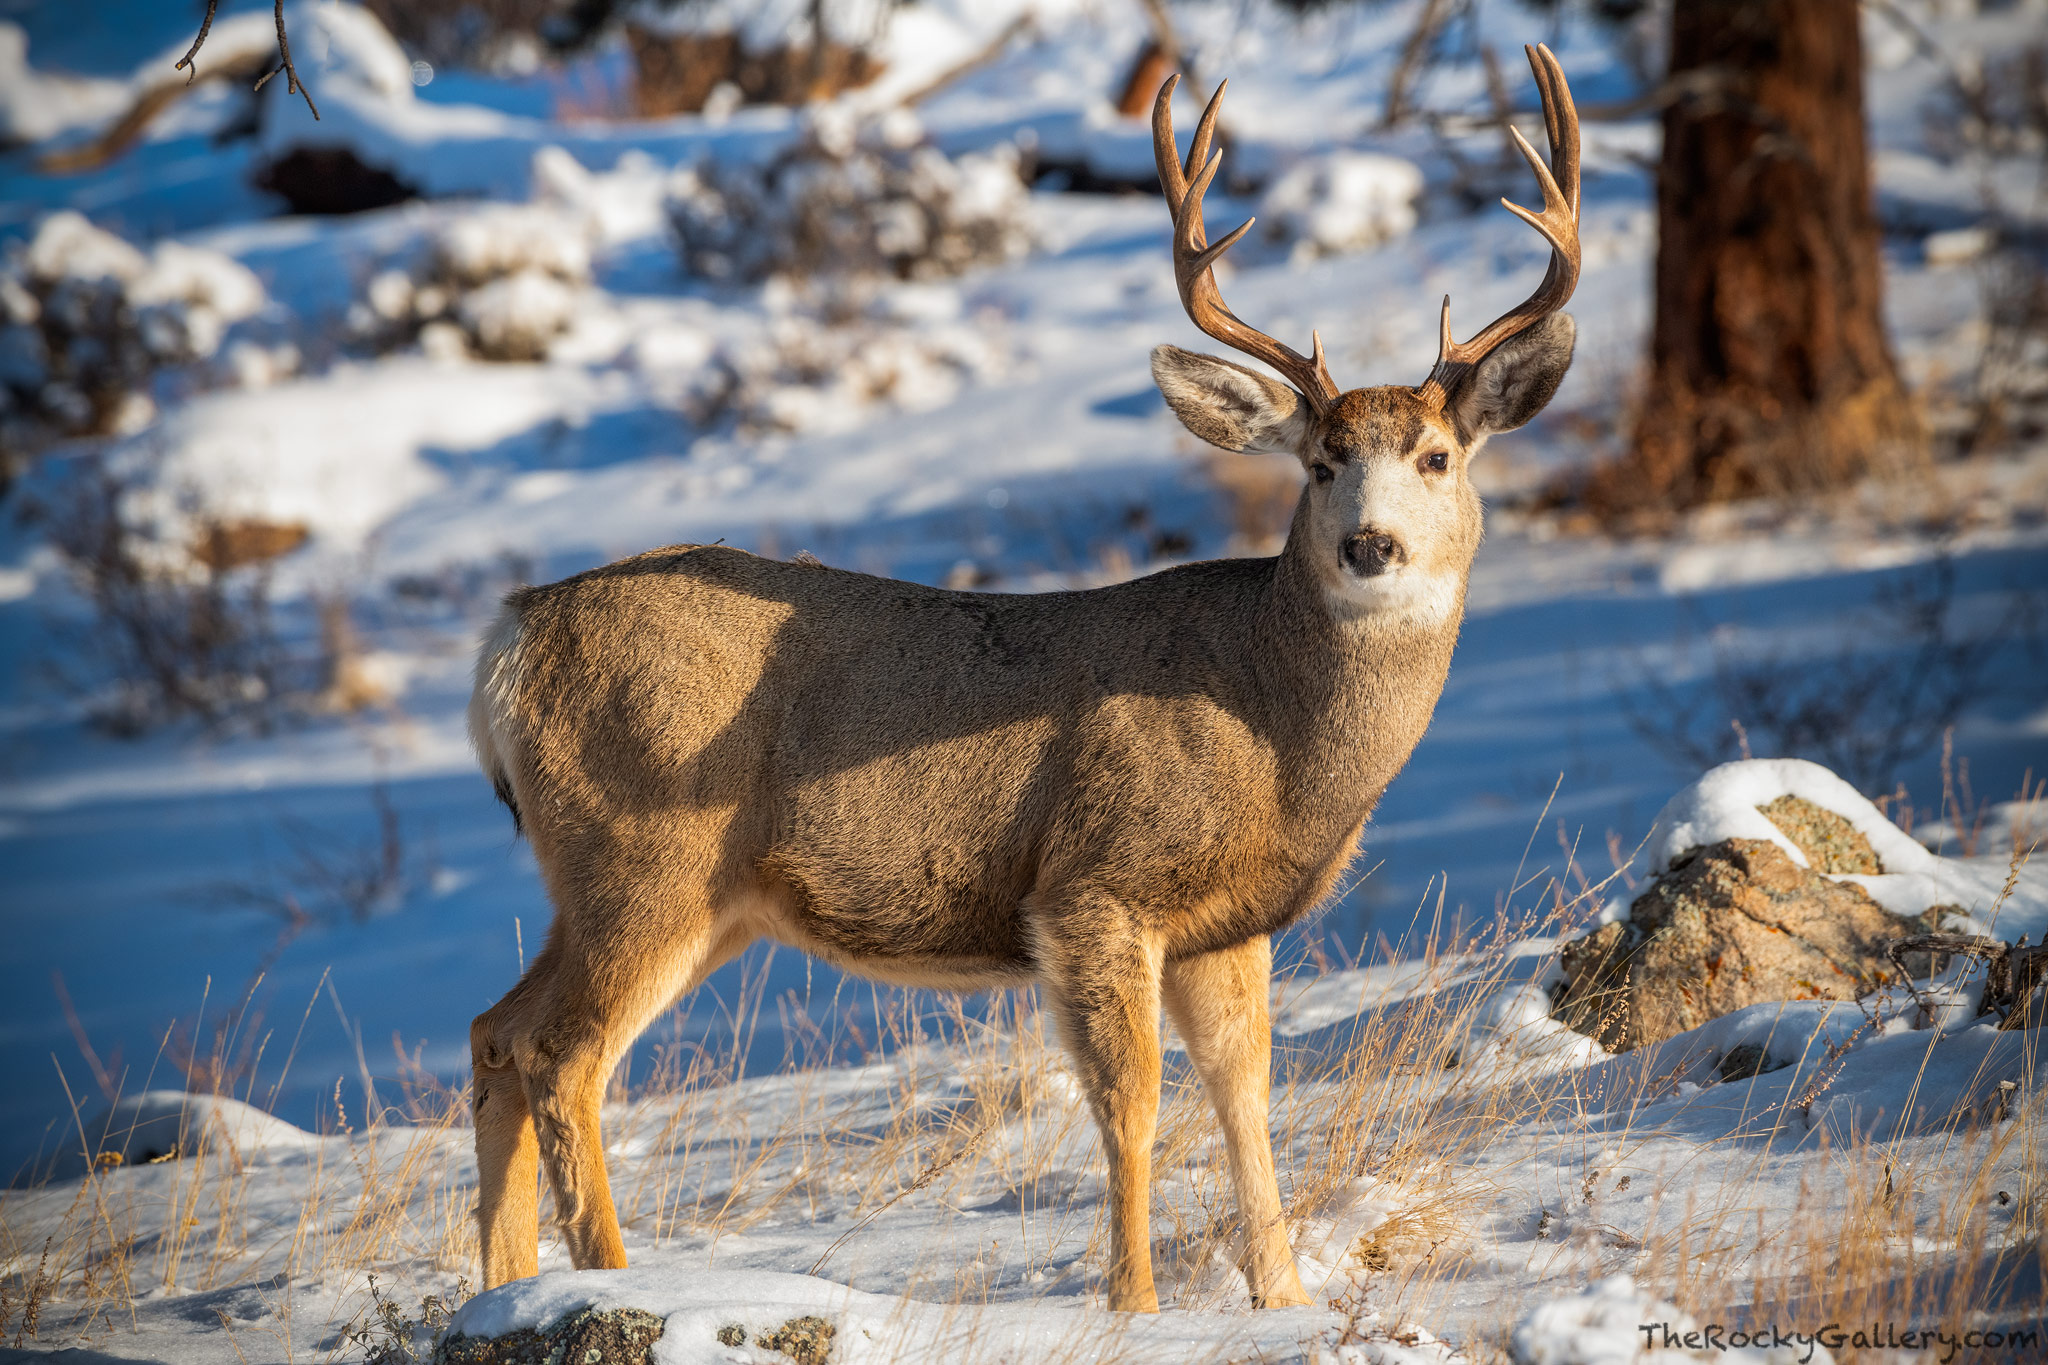 On a cold December morning along Deer Mountain, a beautiful Mule Deer Buck pauses for a moment before going back to grazing along...